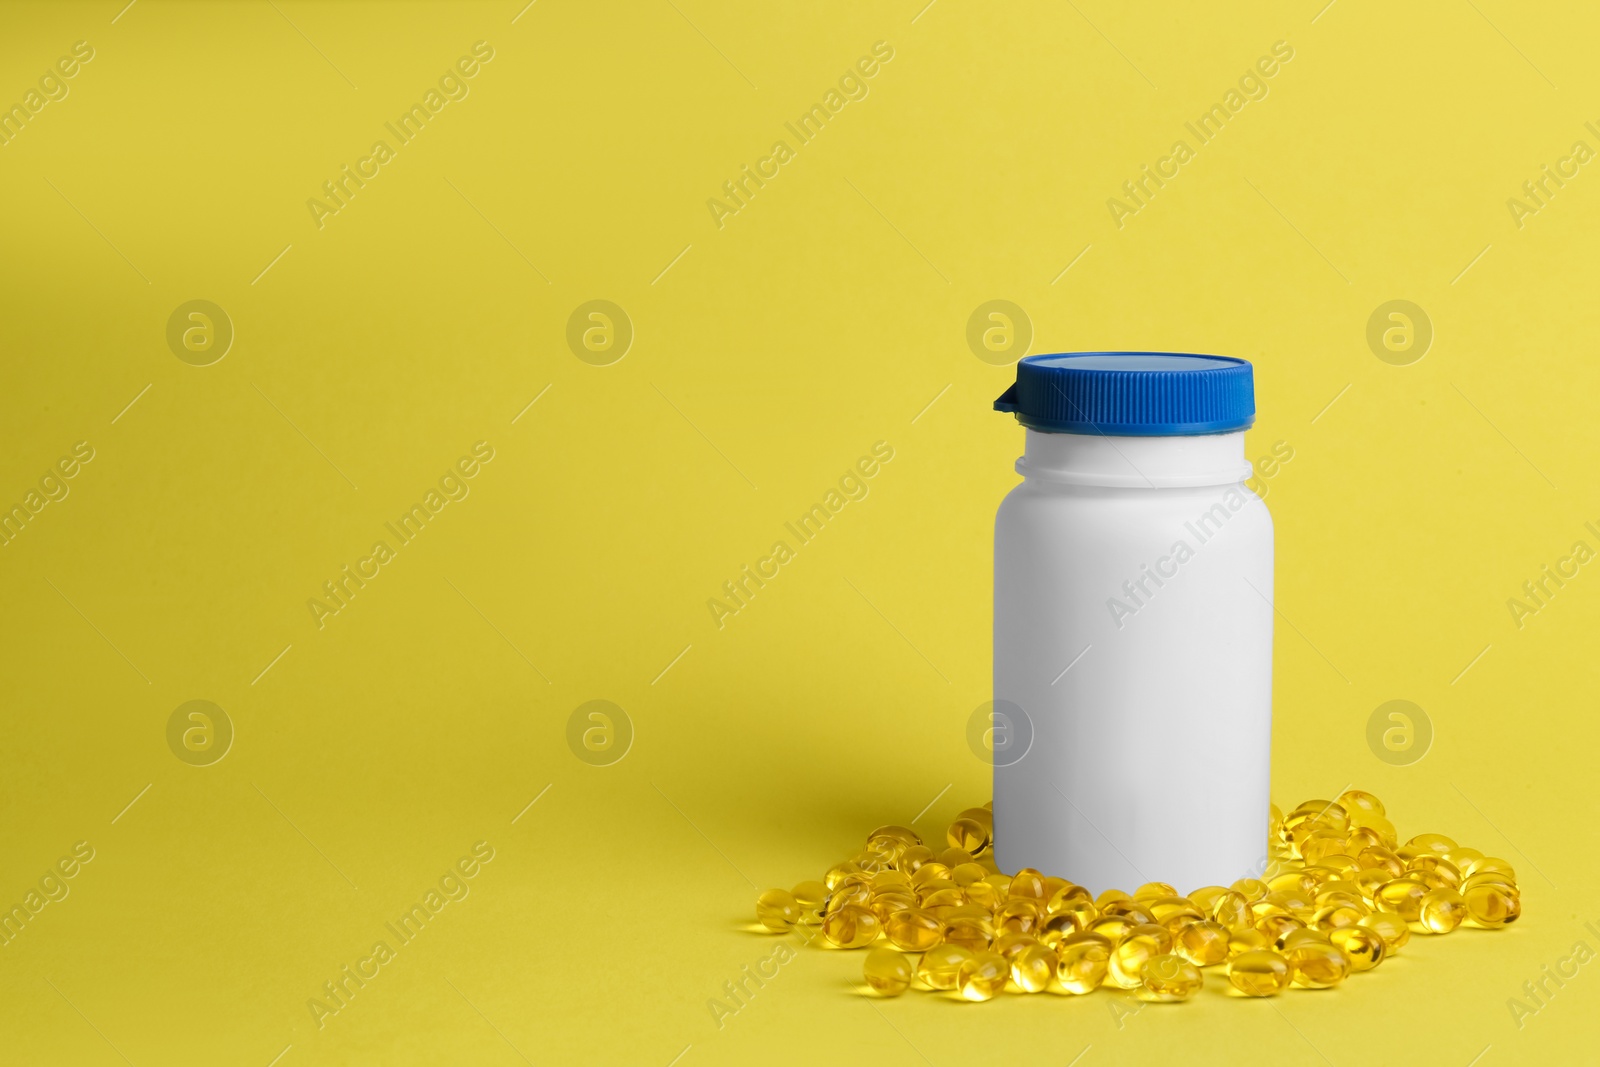 Photo of Medicine bottle and pills on yellow background, space for text